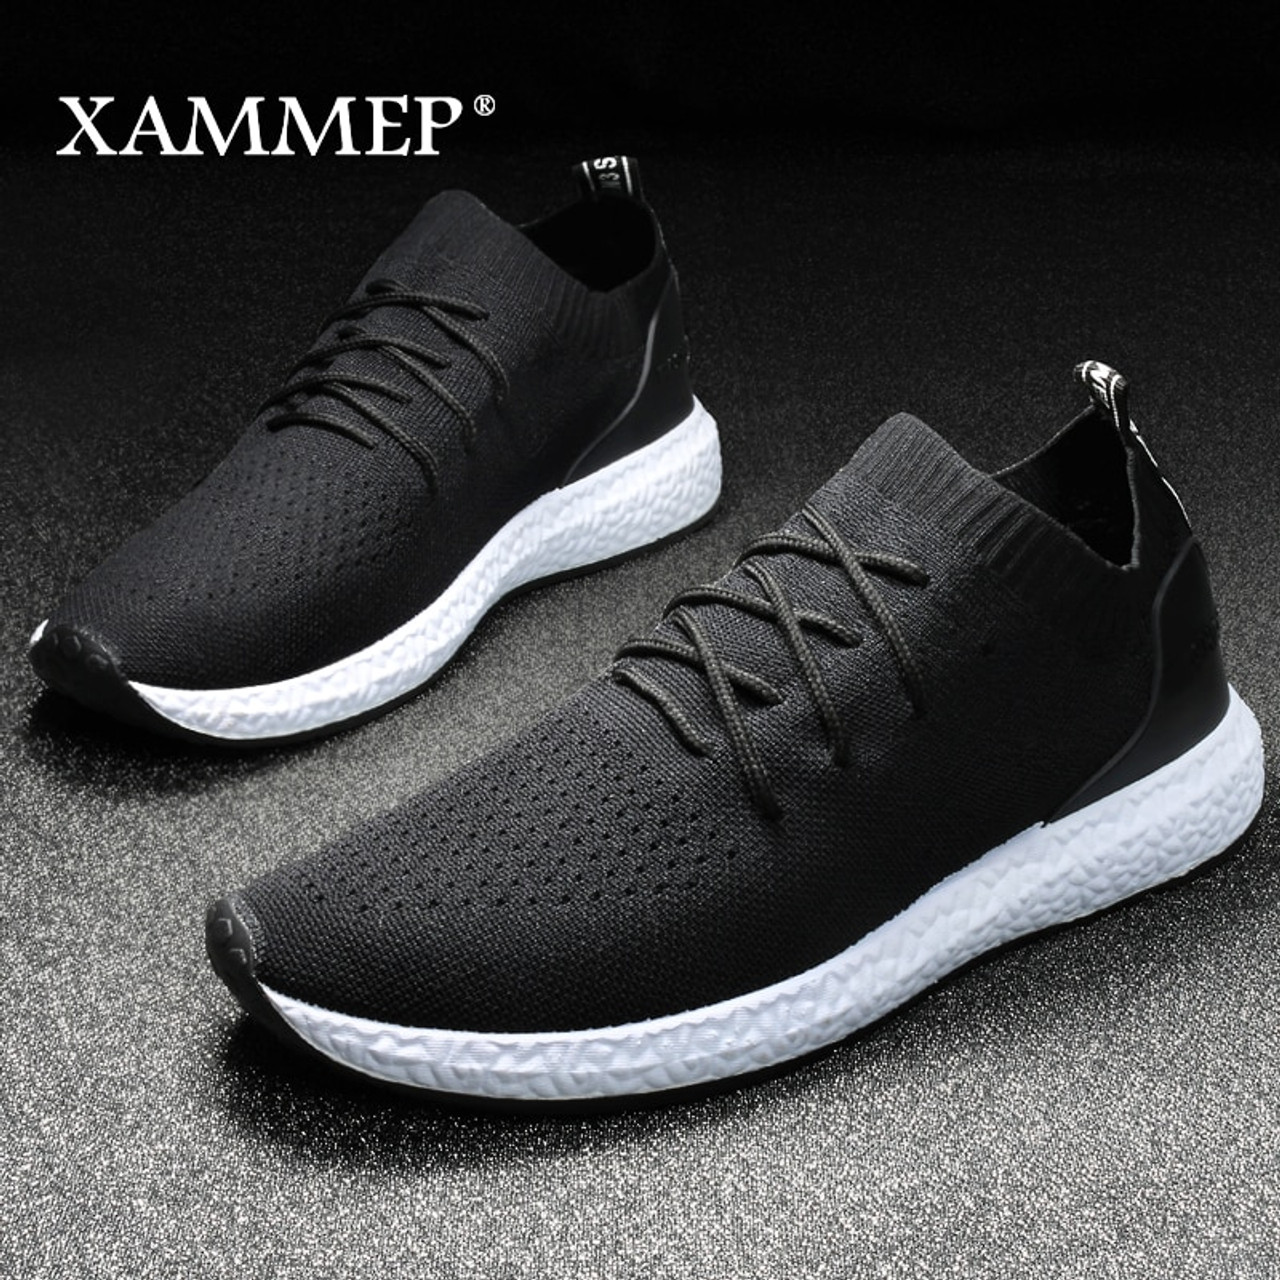 branded casual shoes for boys